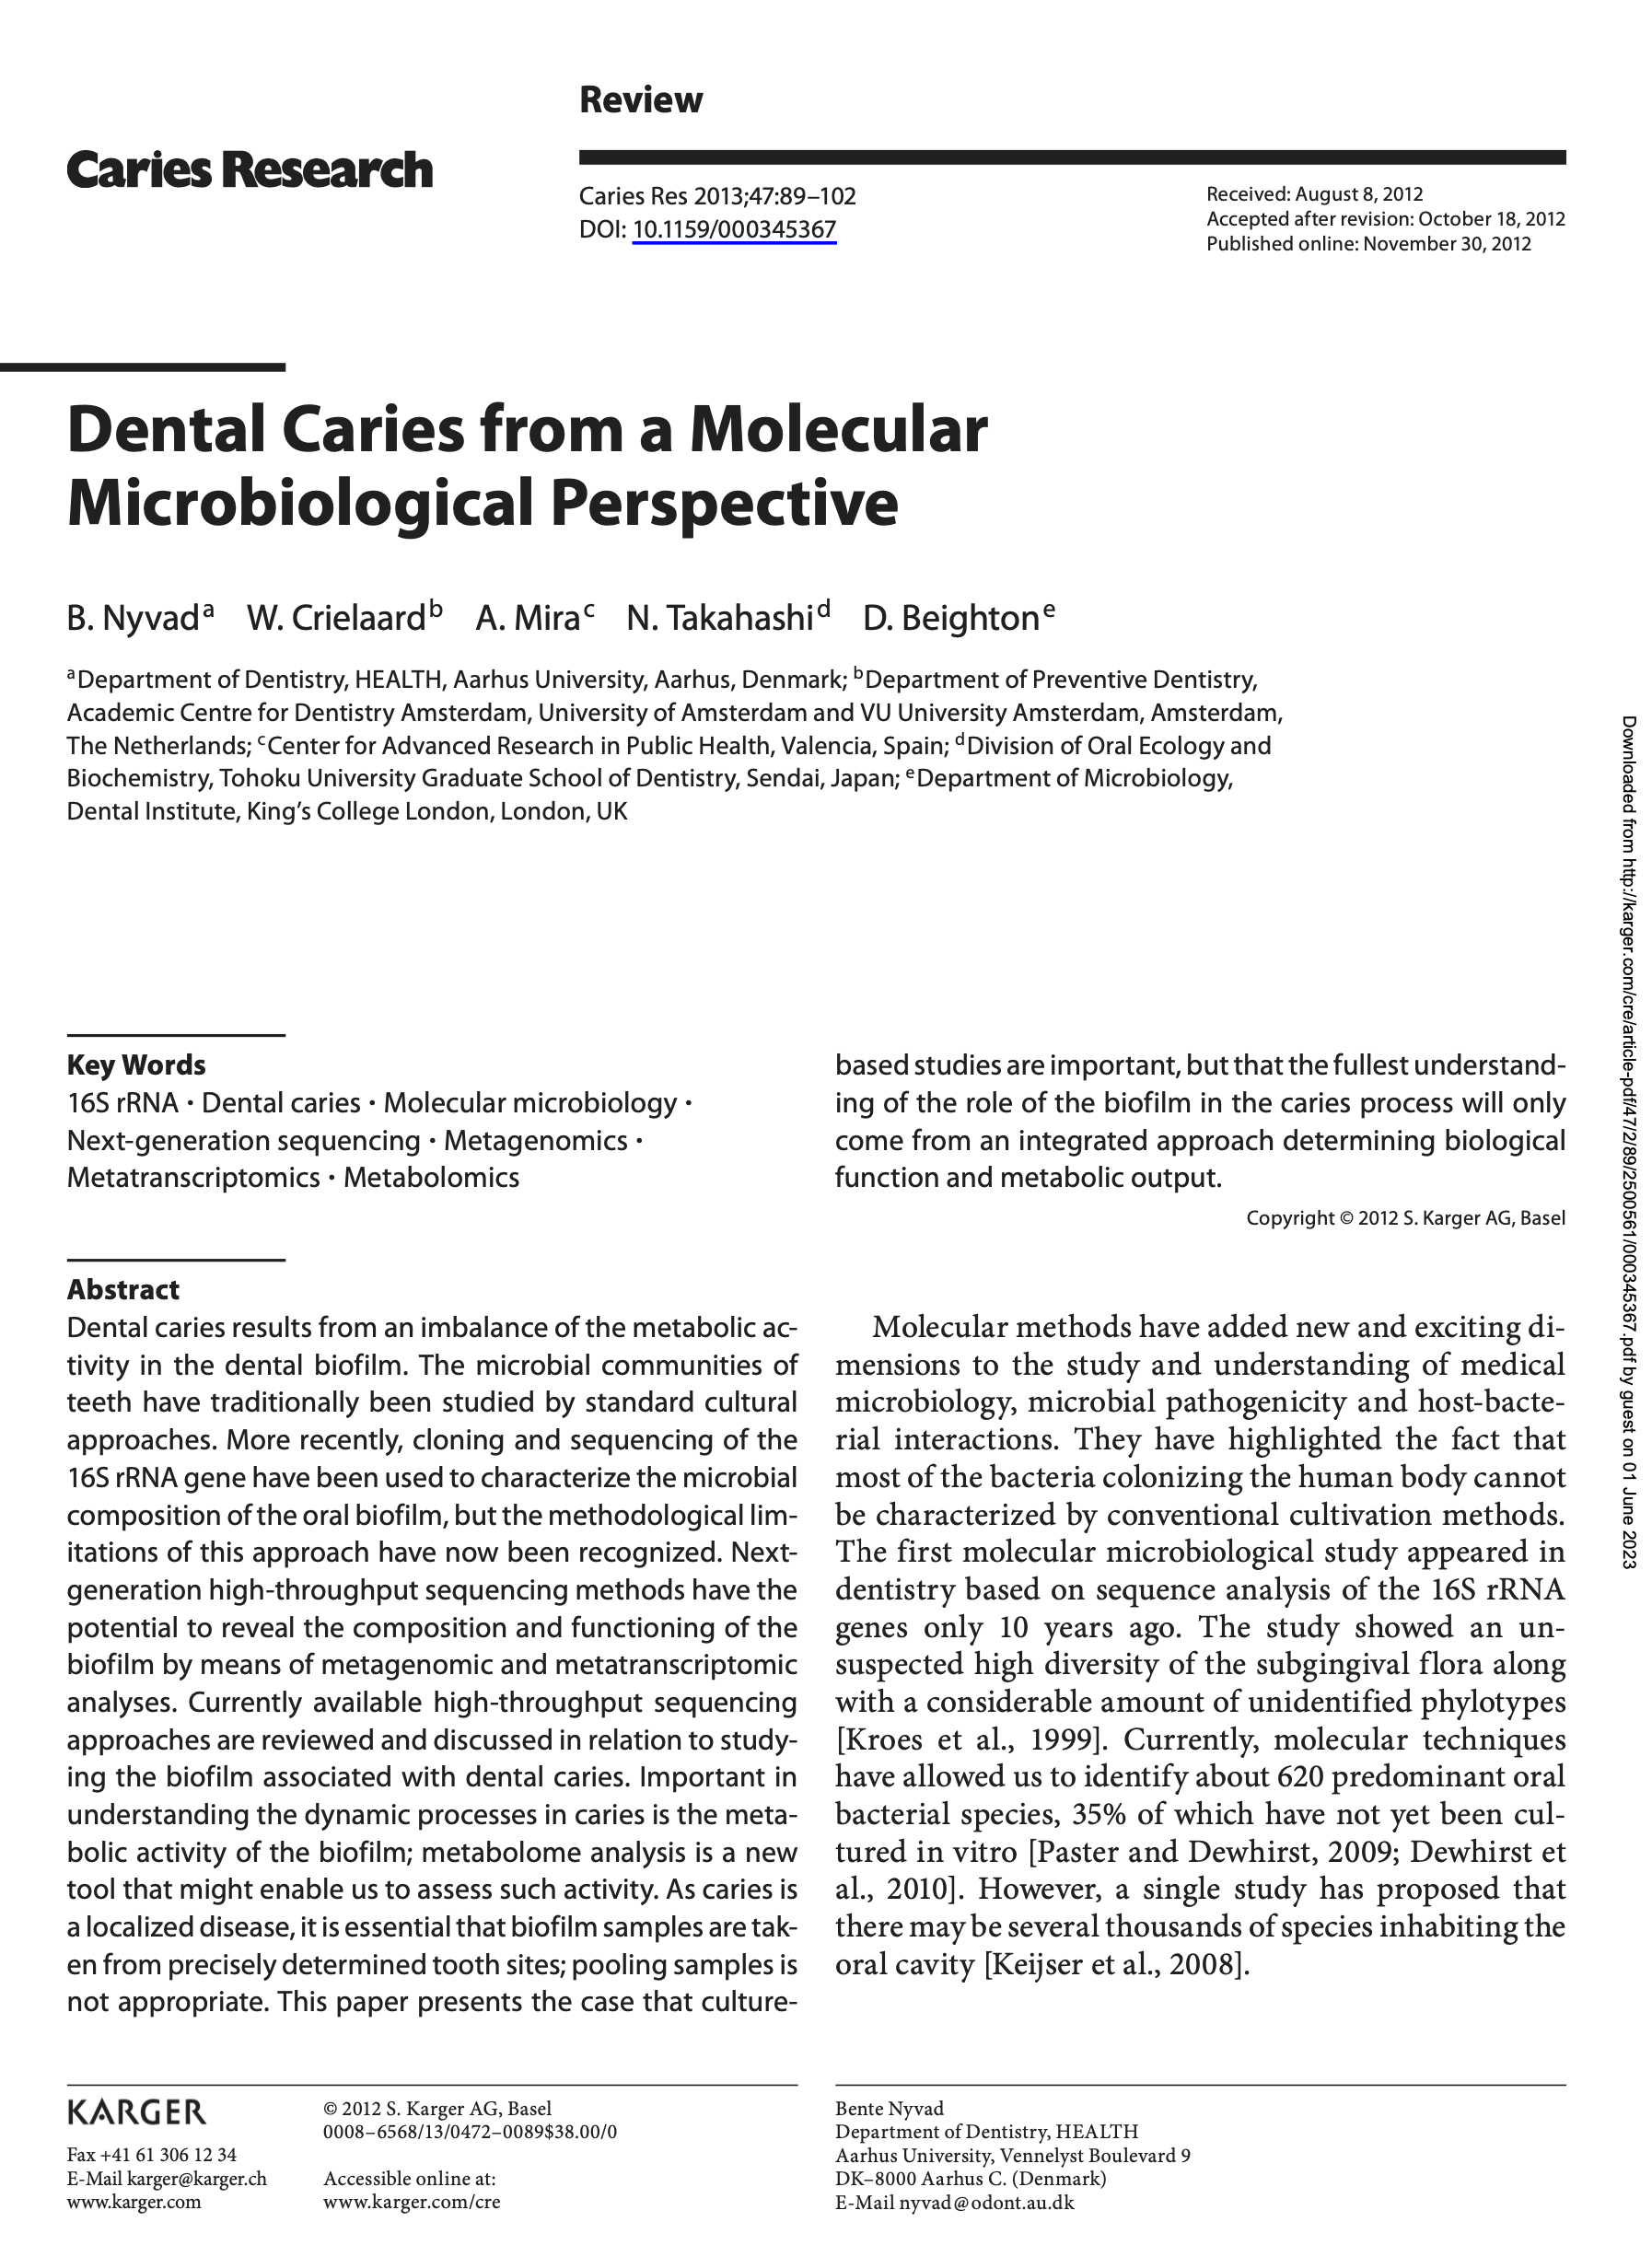 Dental Caries from a Molecular Microbiological Perspective